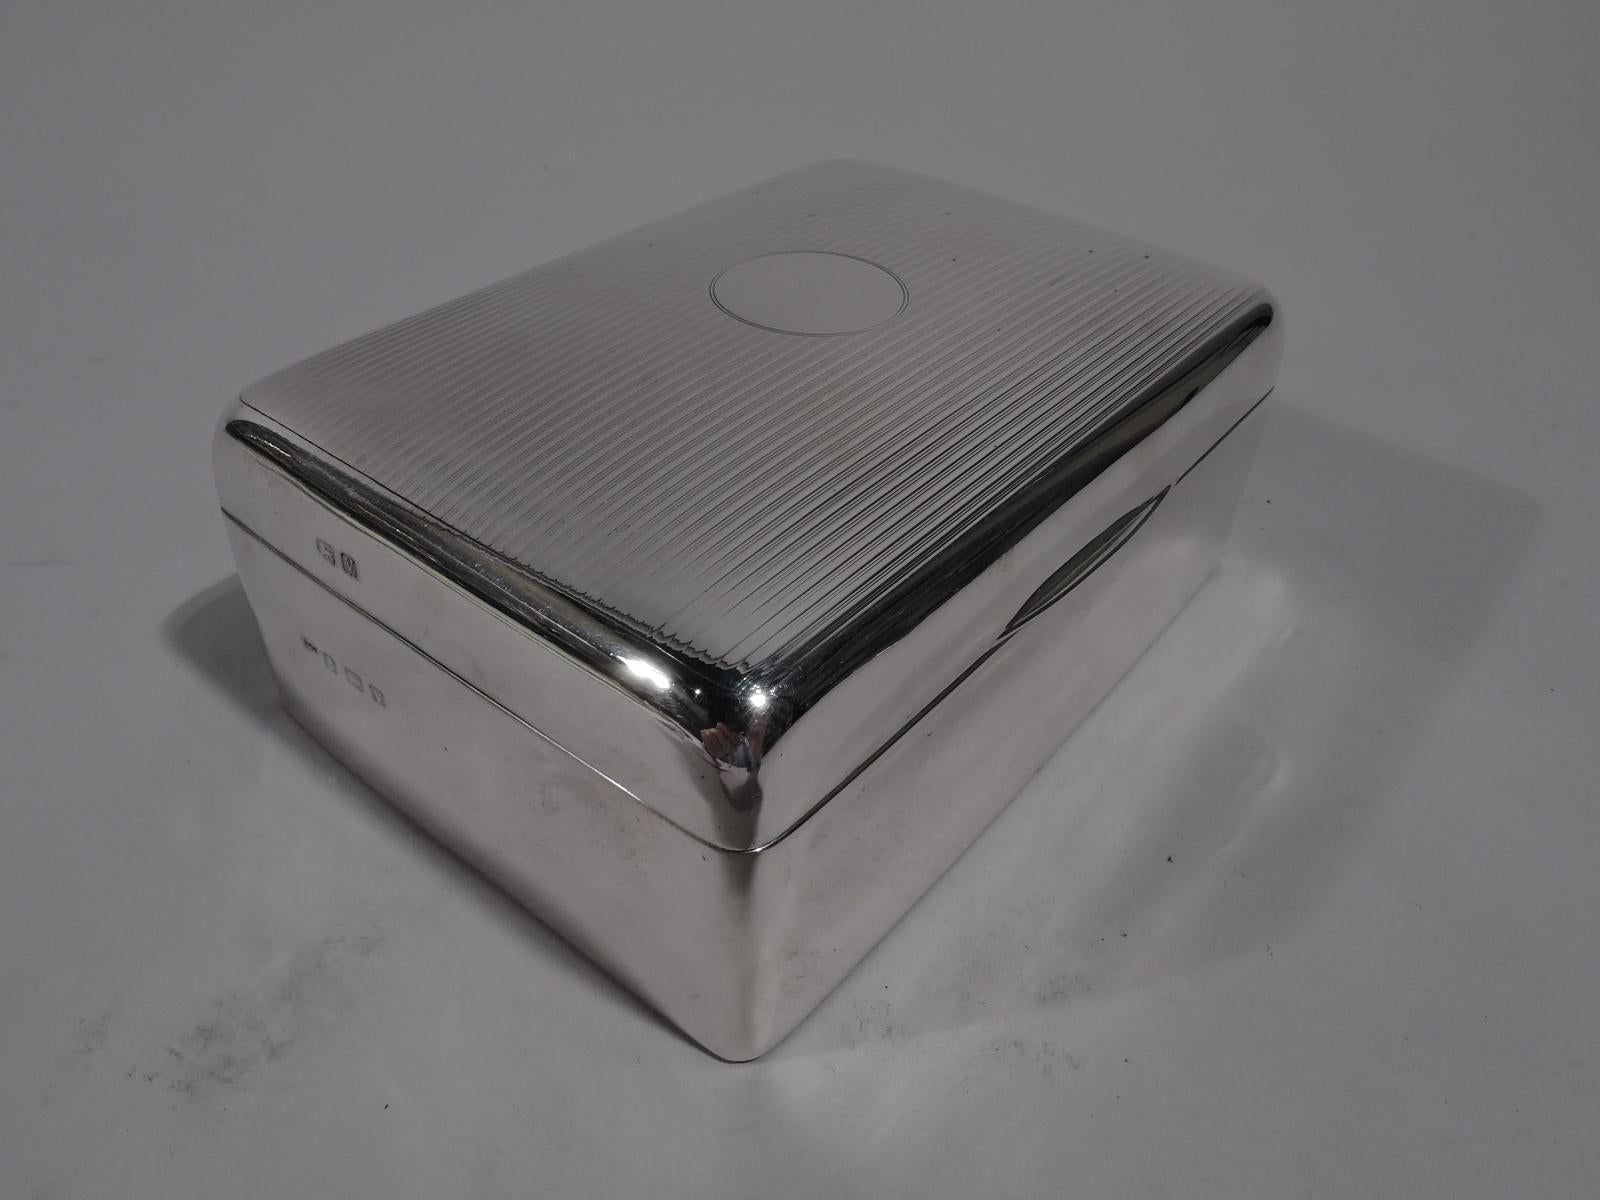 George V sterling silver box. Made by Charles S. Green & Co. in Birmingham in 1920. Rectangular with straight sides and curved corners. Cover hinged, curved, and tabbed. Cover top has engine-turned horizontal lines and central circular frame